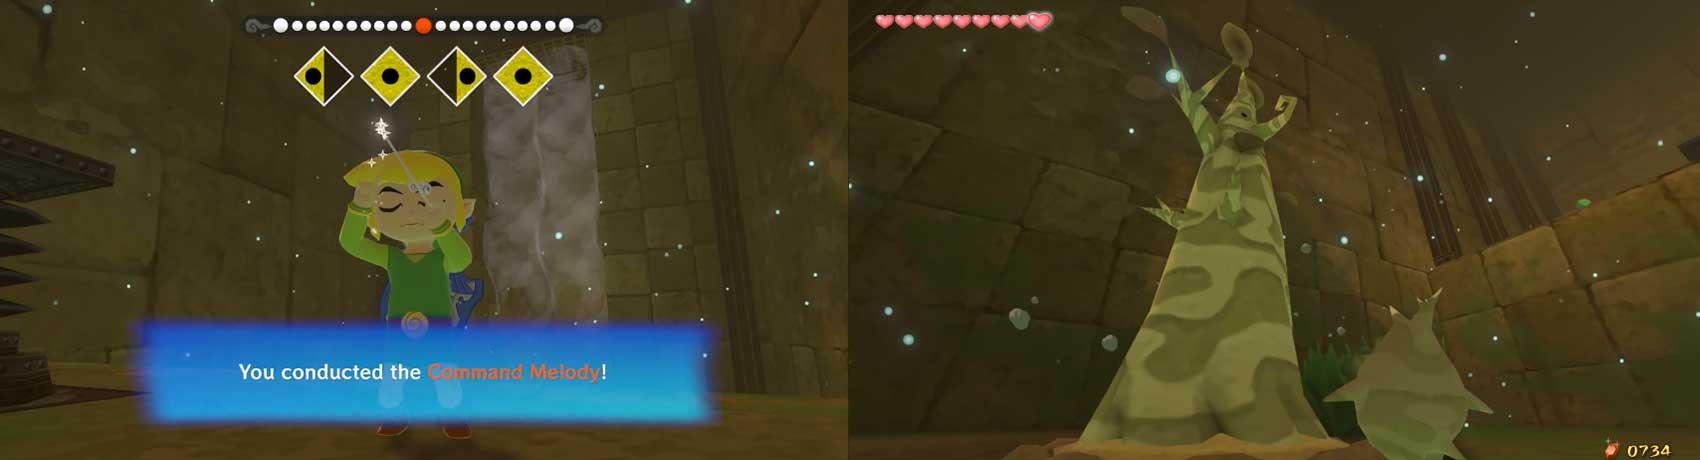 Still as Makar, fly up to the ledge that you haven’t been on and step on the switch, then return to Link.